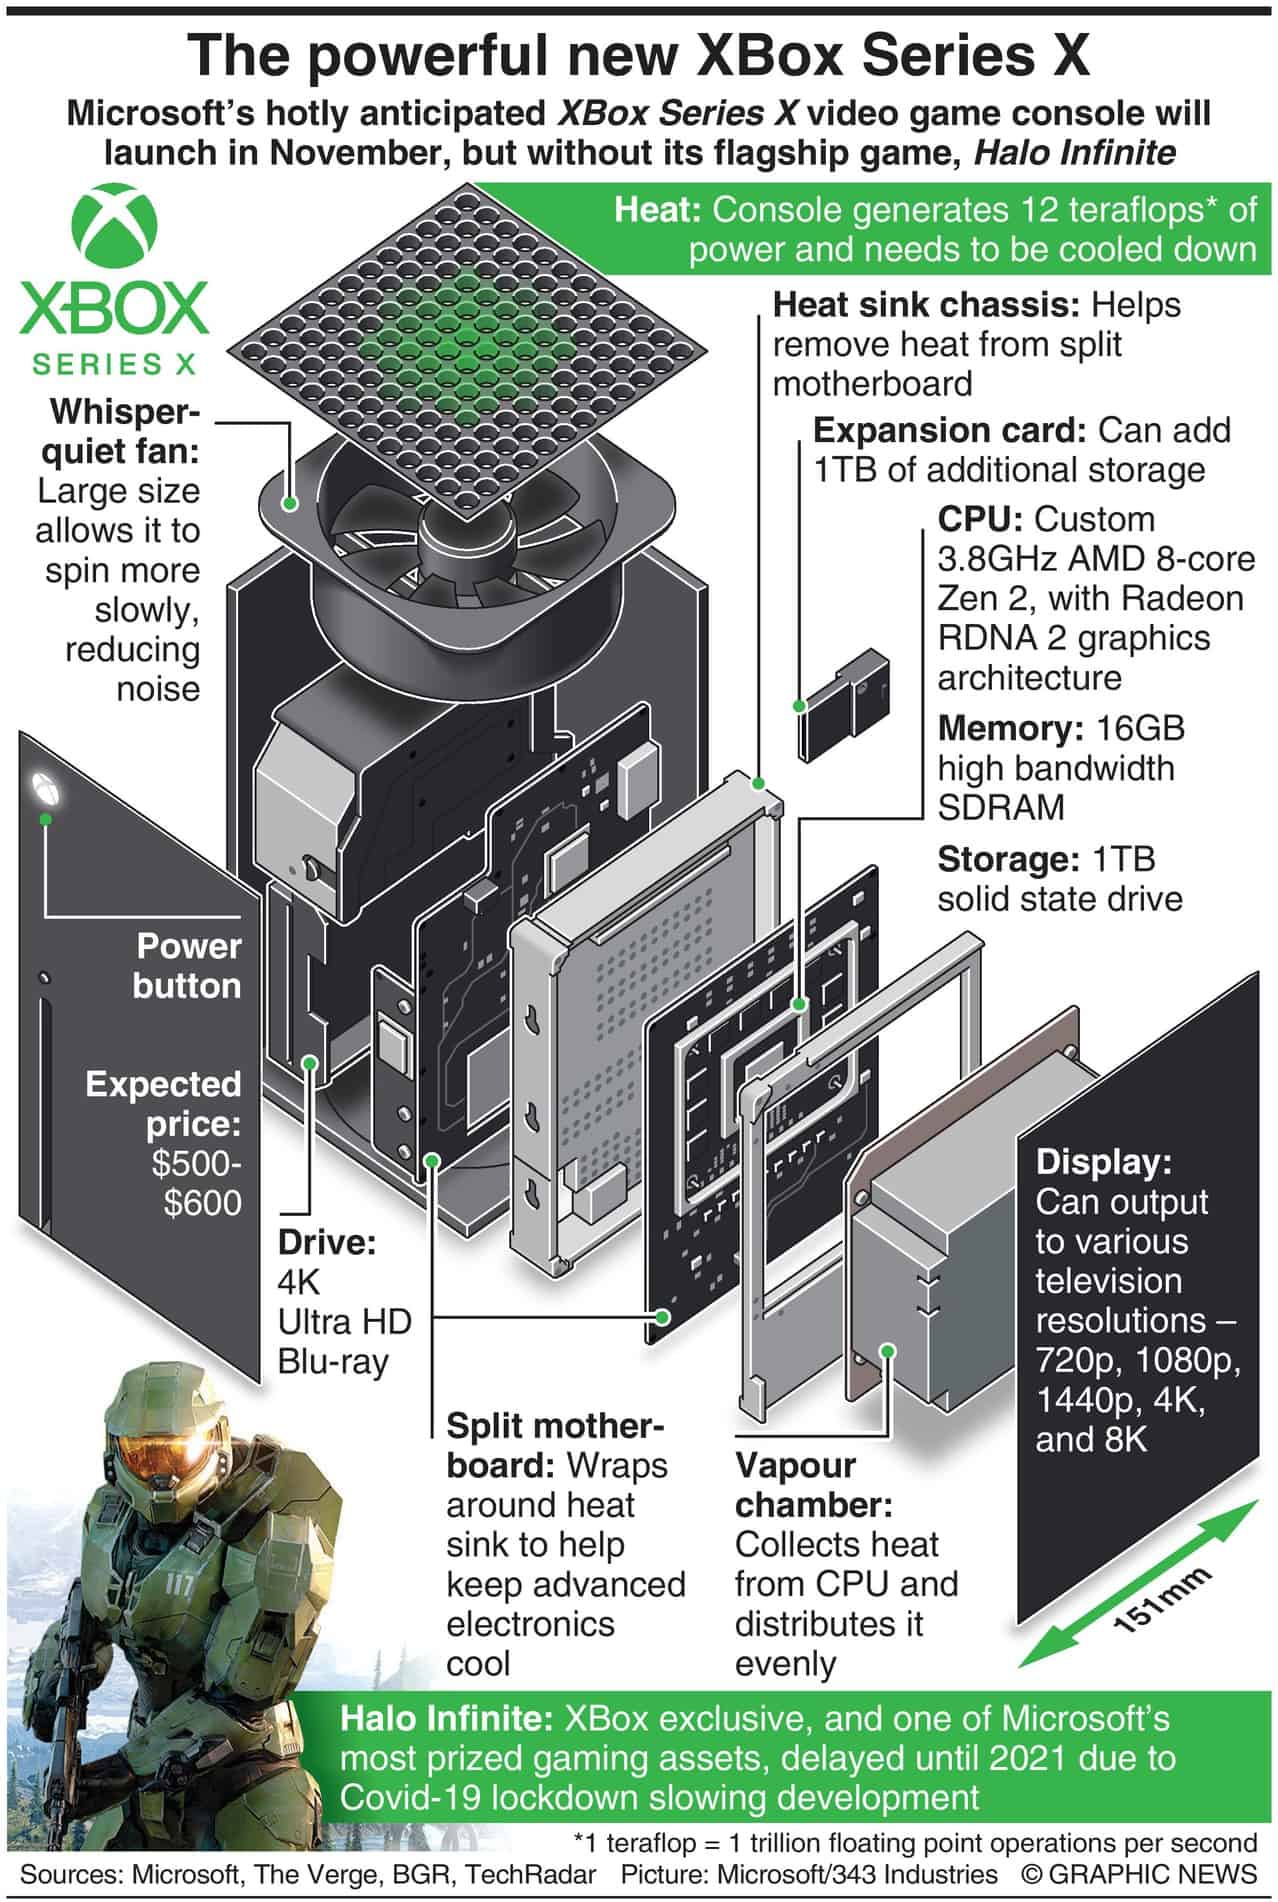 All the elements of the XBox Series X and how they work